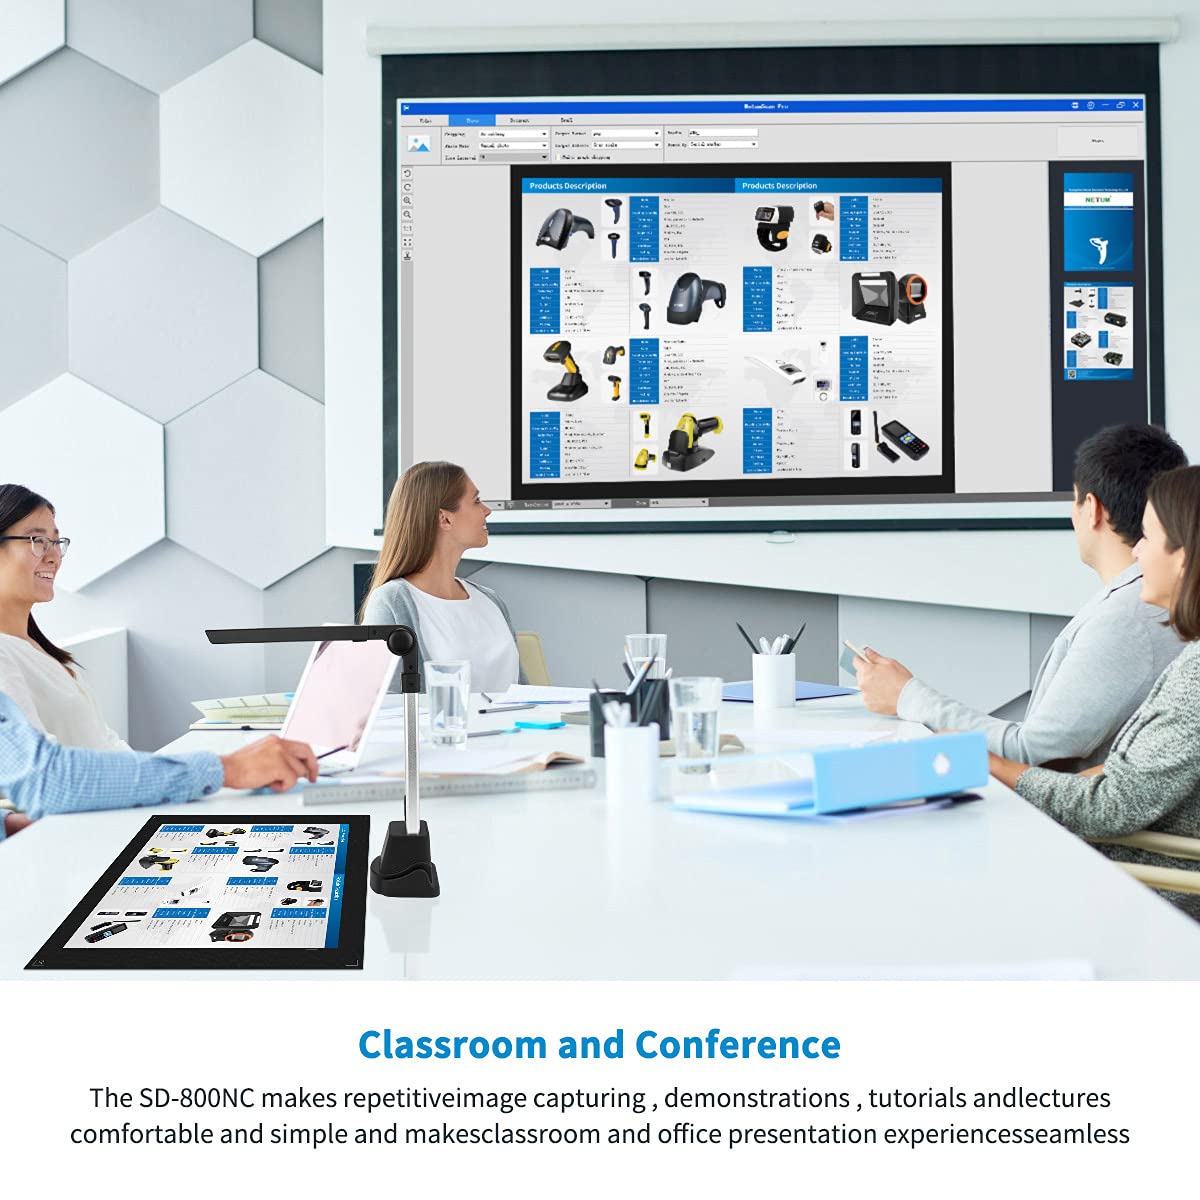 NetumScan Book & Document Camera for Teachers, Multi-Language OCR and English Article Recognition by AI Technology, Real-time Projection, Video Recording, Foldable & Portable, Only Windows